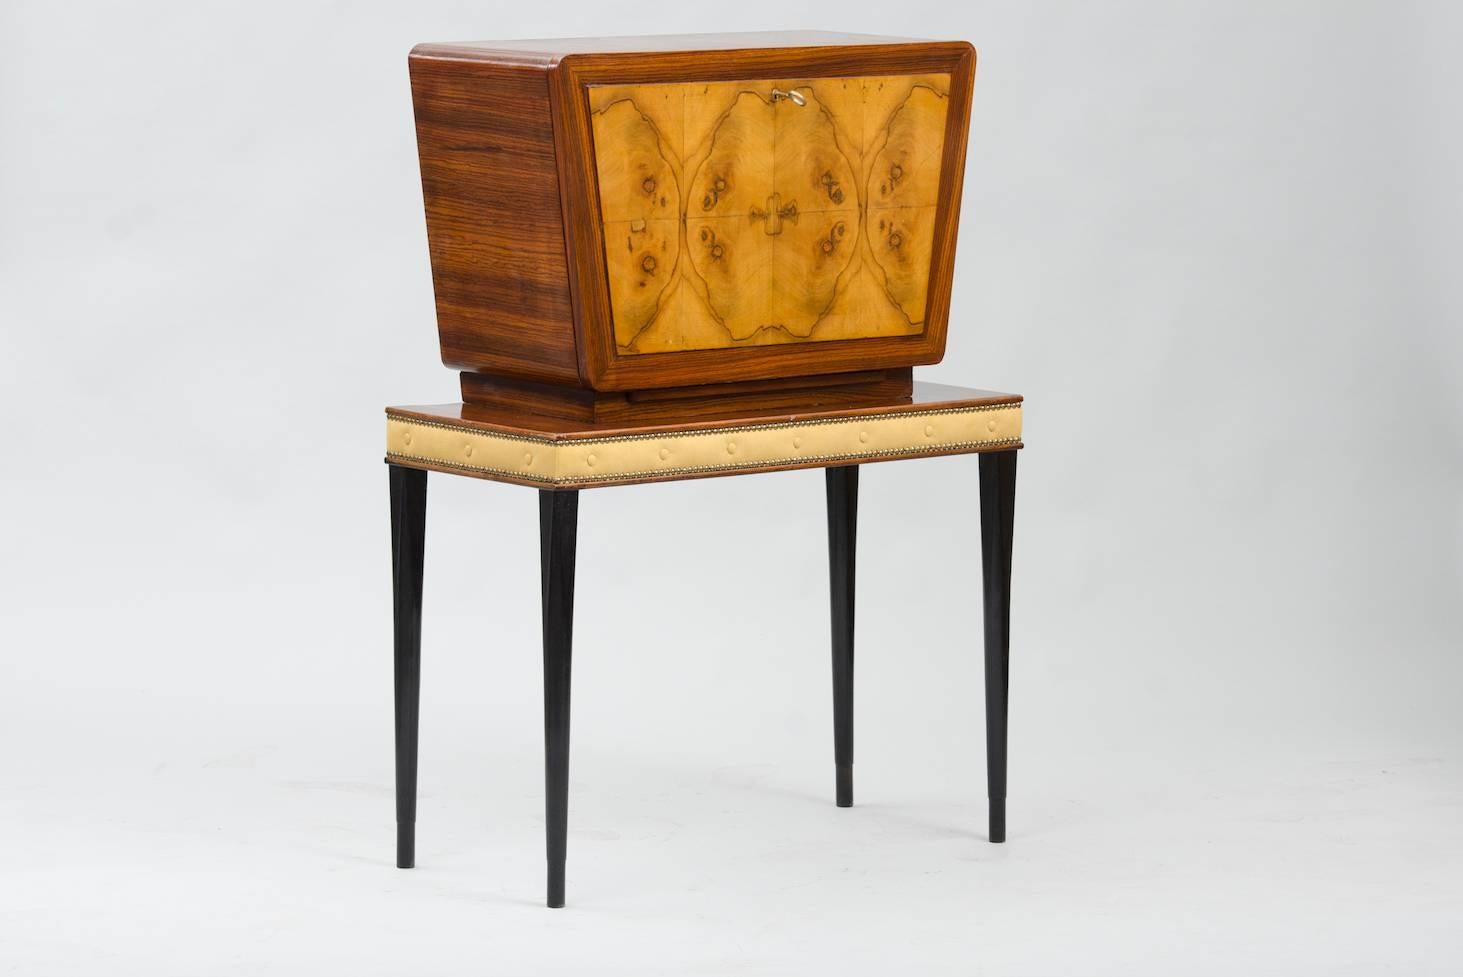 Rosewood, olive wood root and fabric cocktail cabinet.
Interior with mirror patchwork, glass self and lighting.
Price fully restored: 2750€
The price shown is in the original condition.
We have our own workshop and we can restore these items,